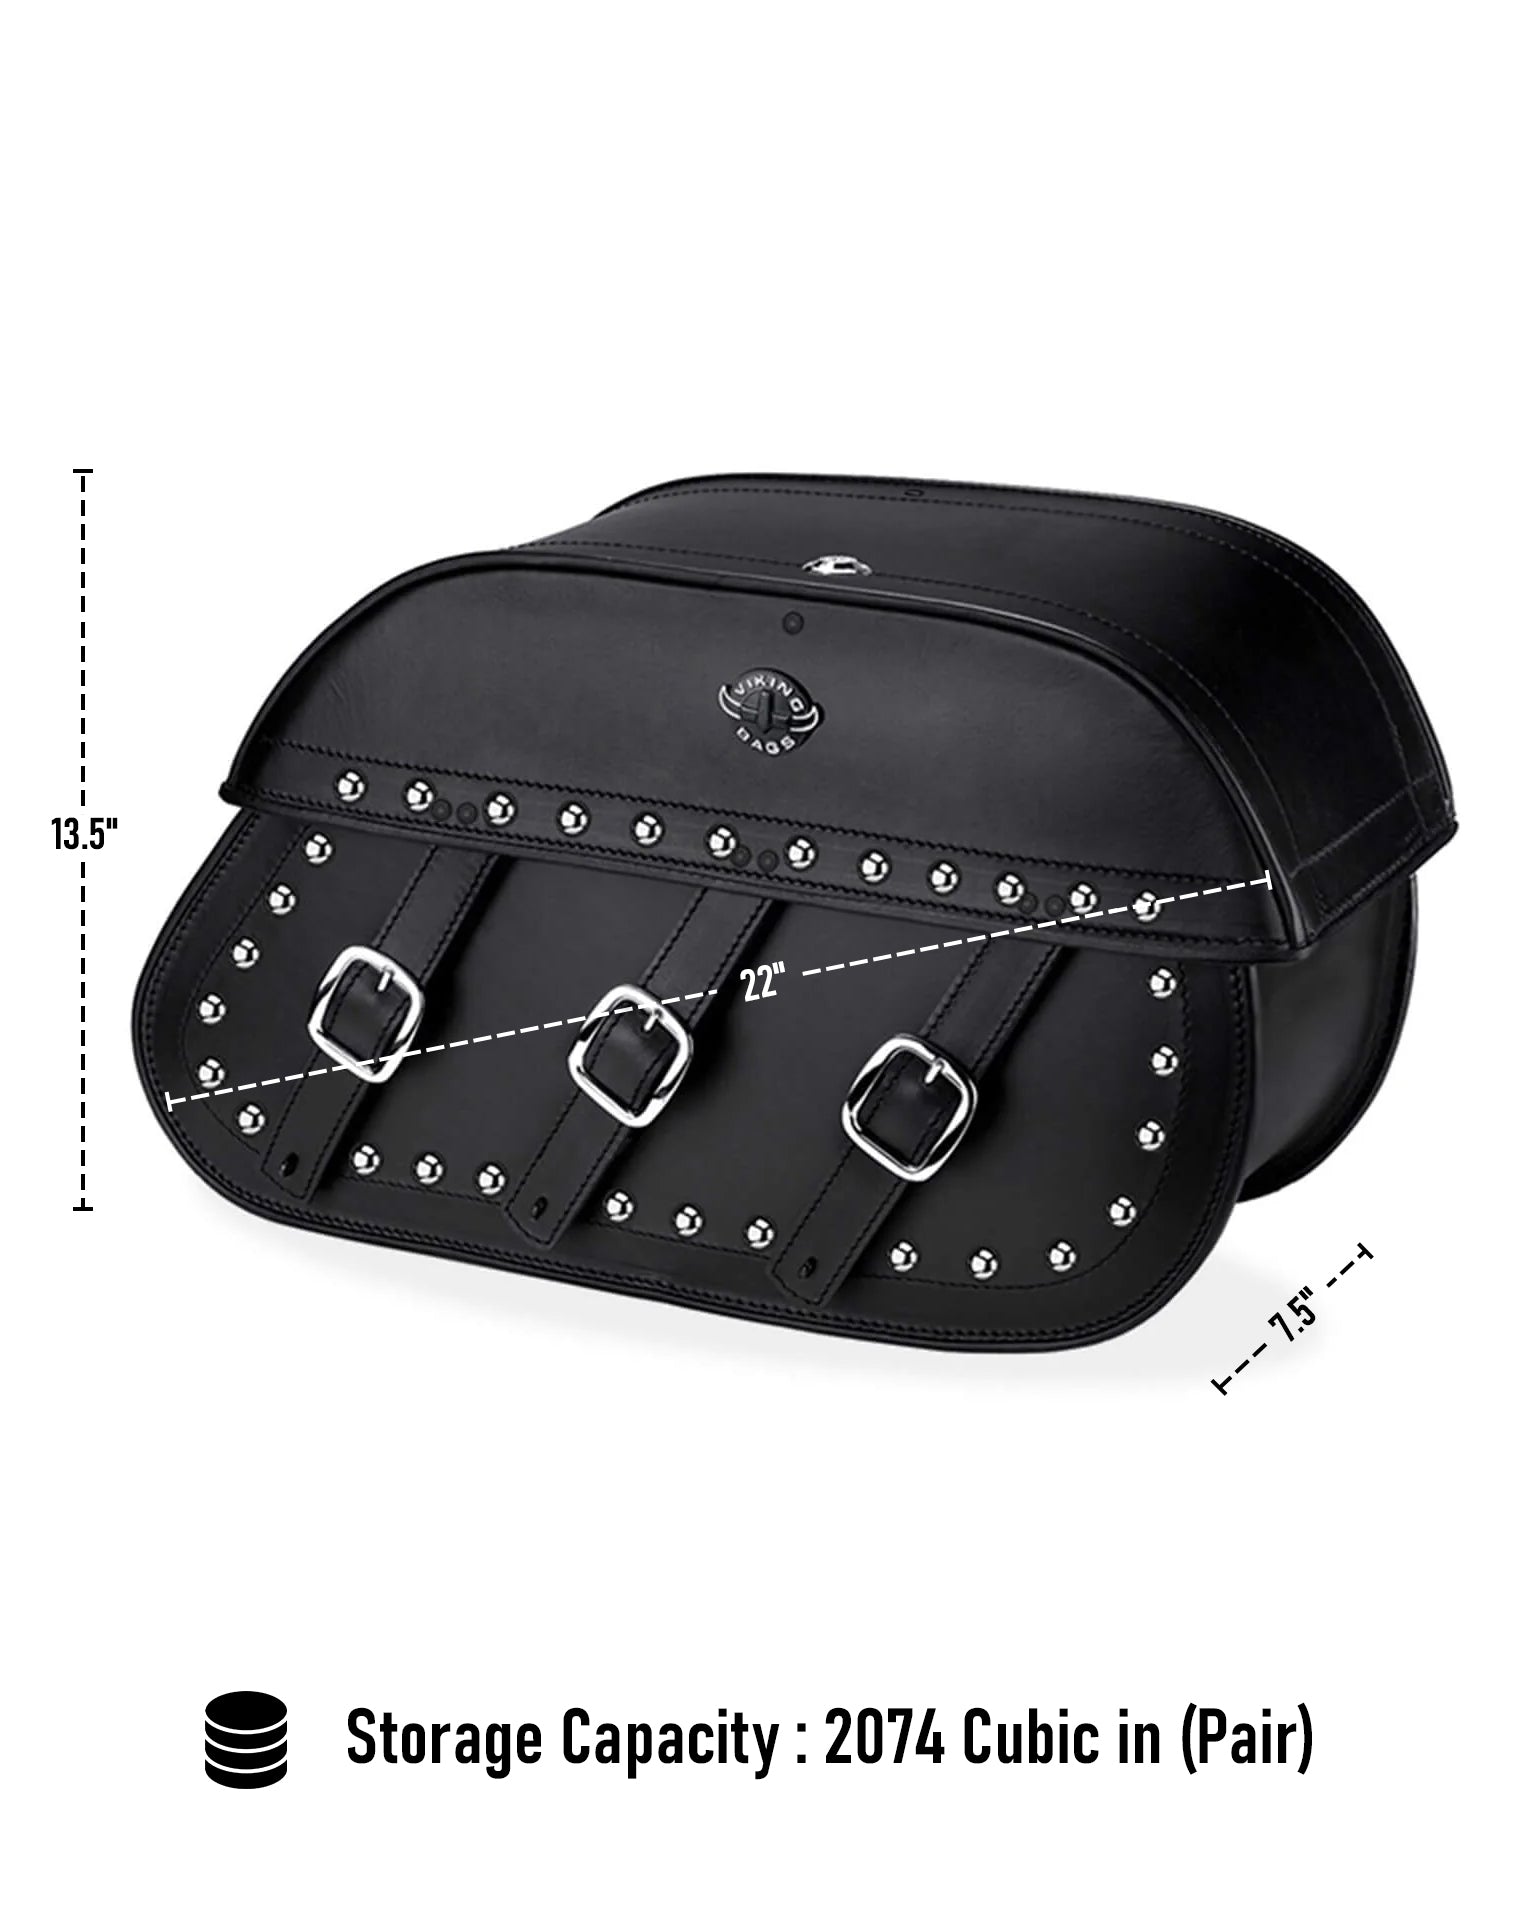 Viking Trianon Extra Large Suzuki Boulevard C50 Vl800 Studded Leather Motorcycle Saddlebags Can Store Your Ridings Gears